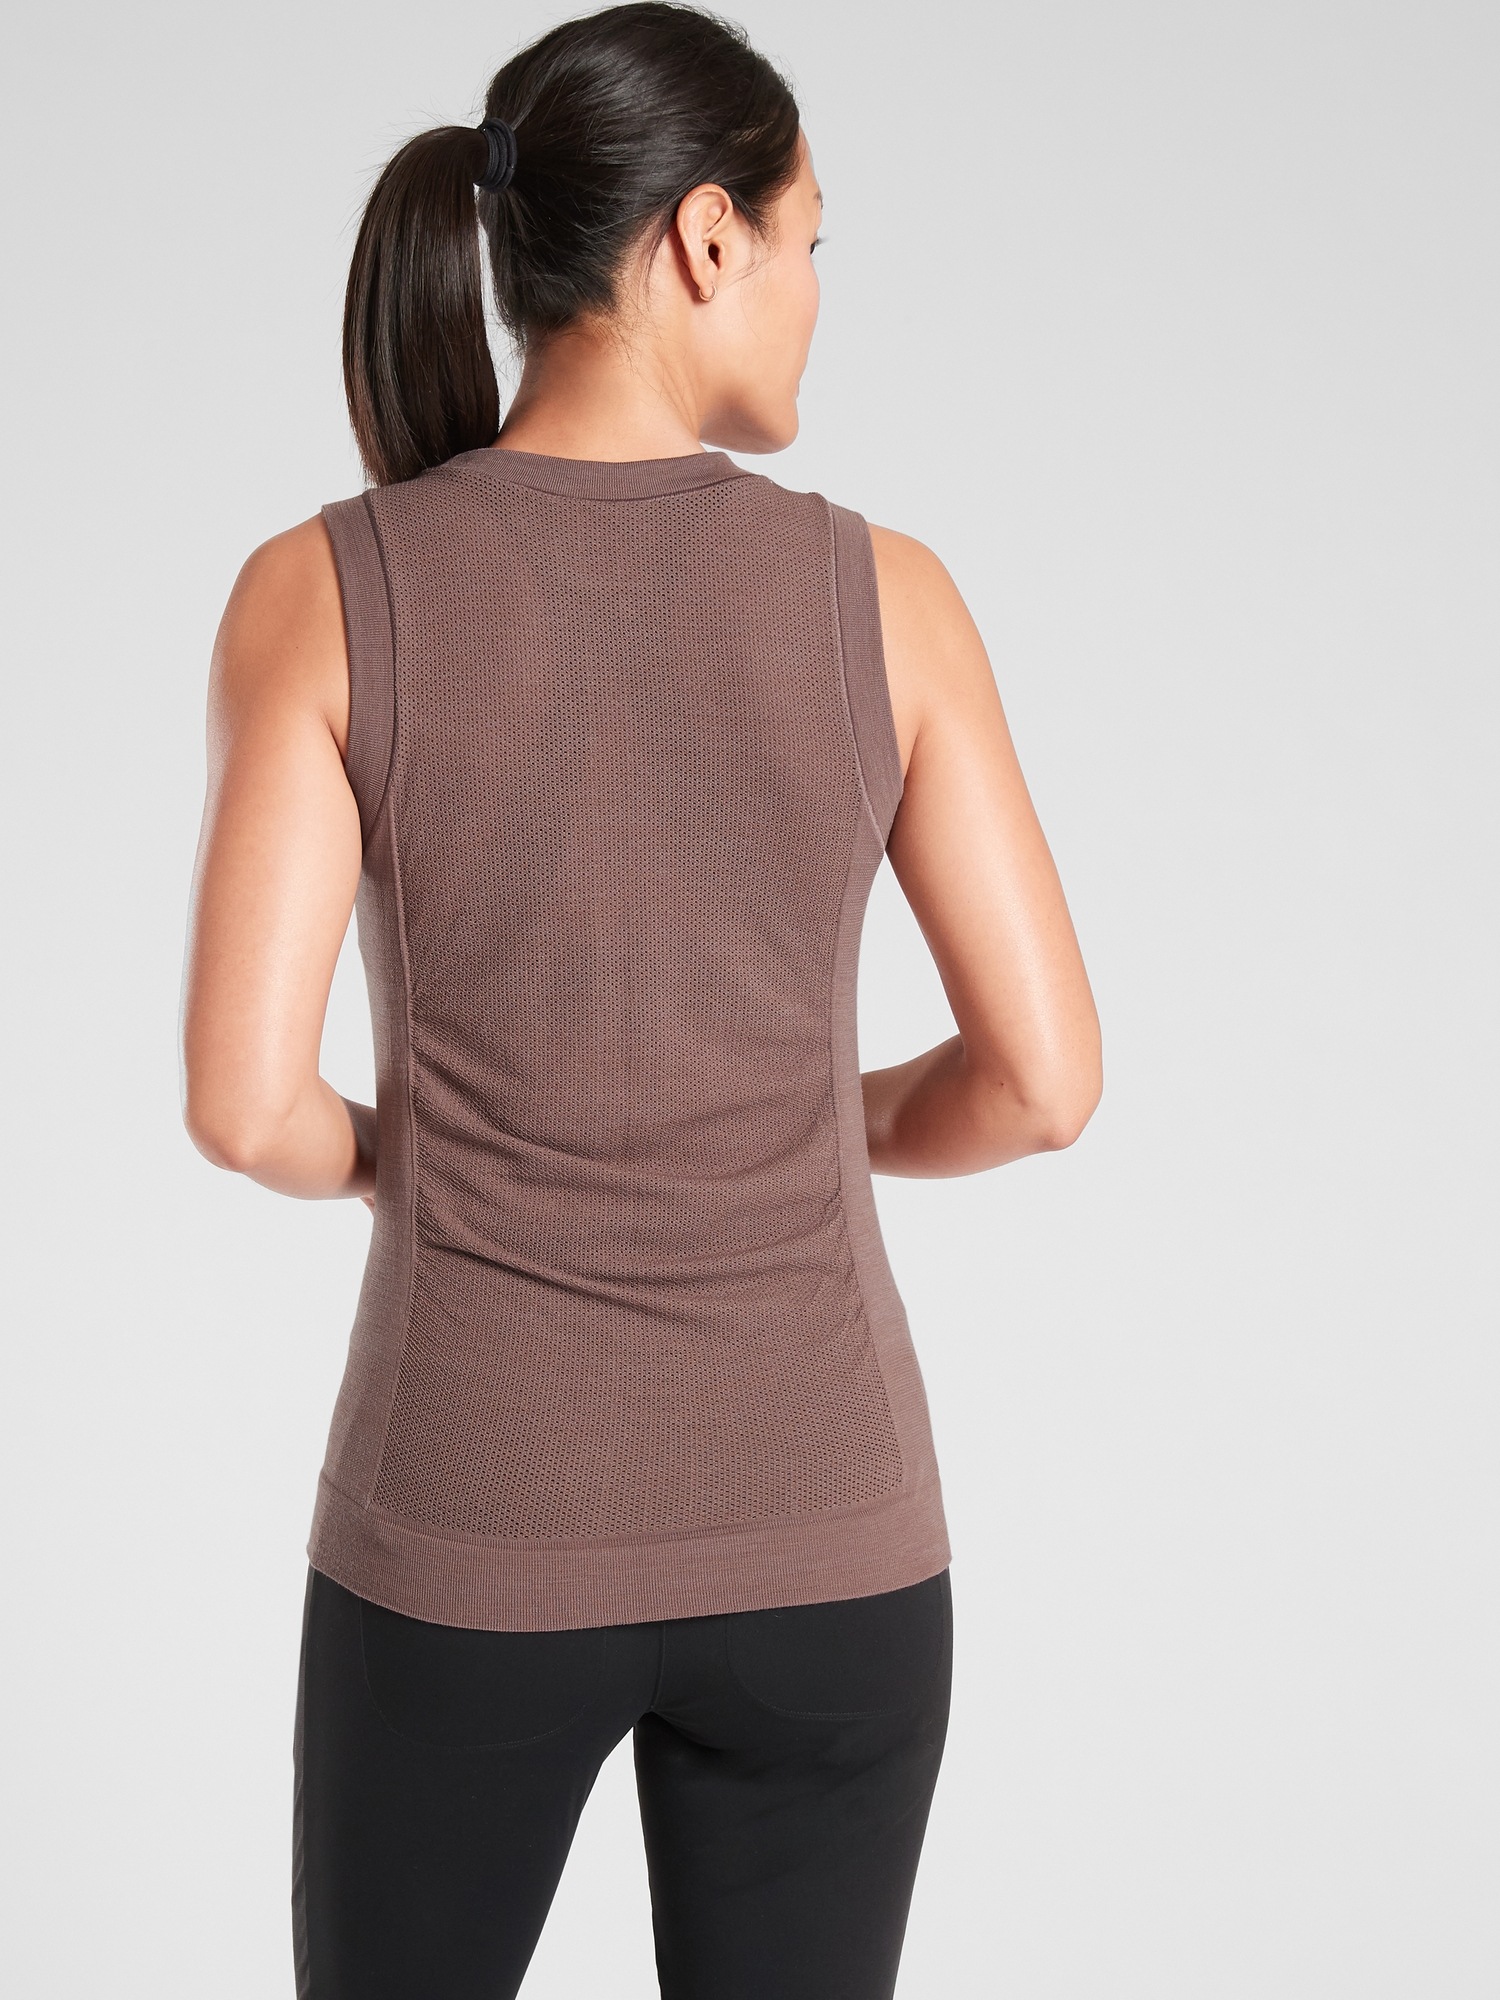 Foresthill Ascent Tank | Athleta